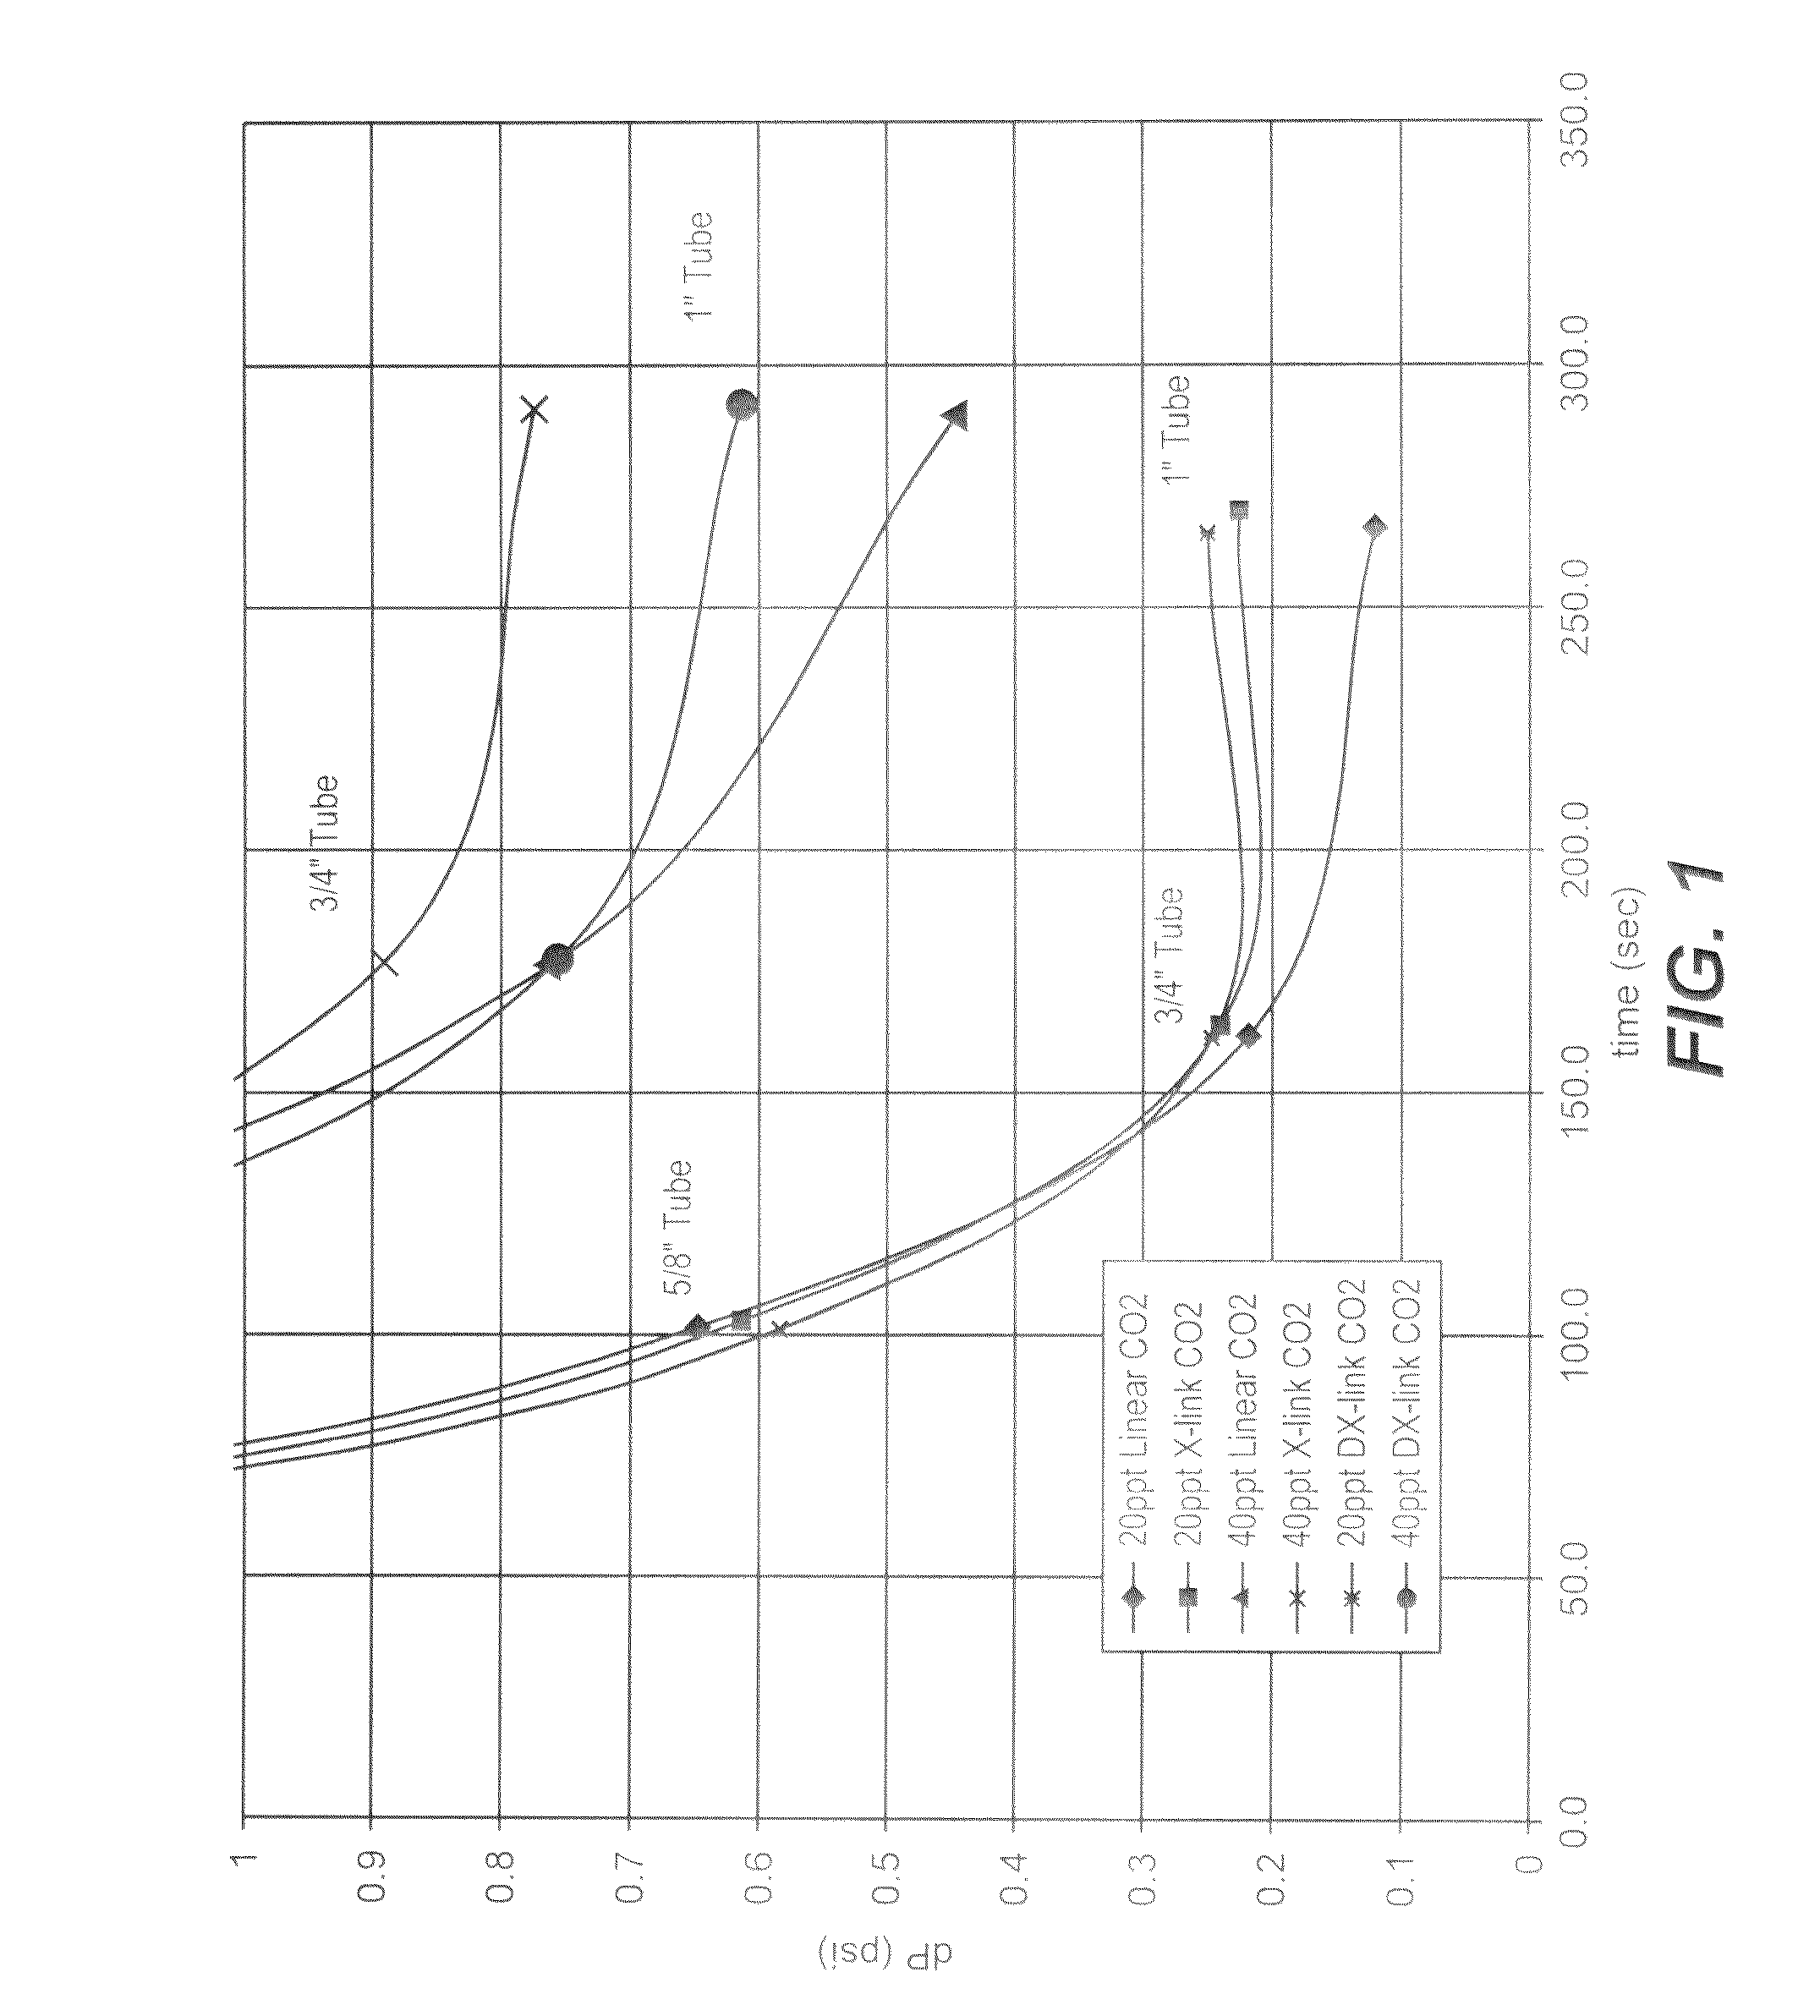 Method of Stimulating Subterranean Formation Using Low pH Fluid Containing a Glycinate Salt